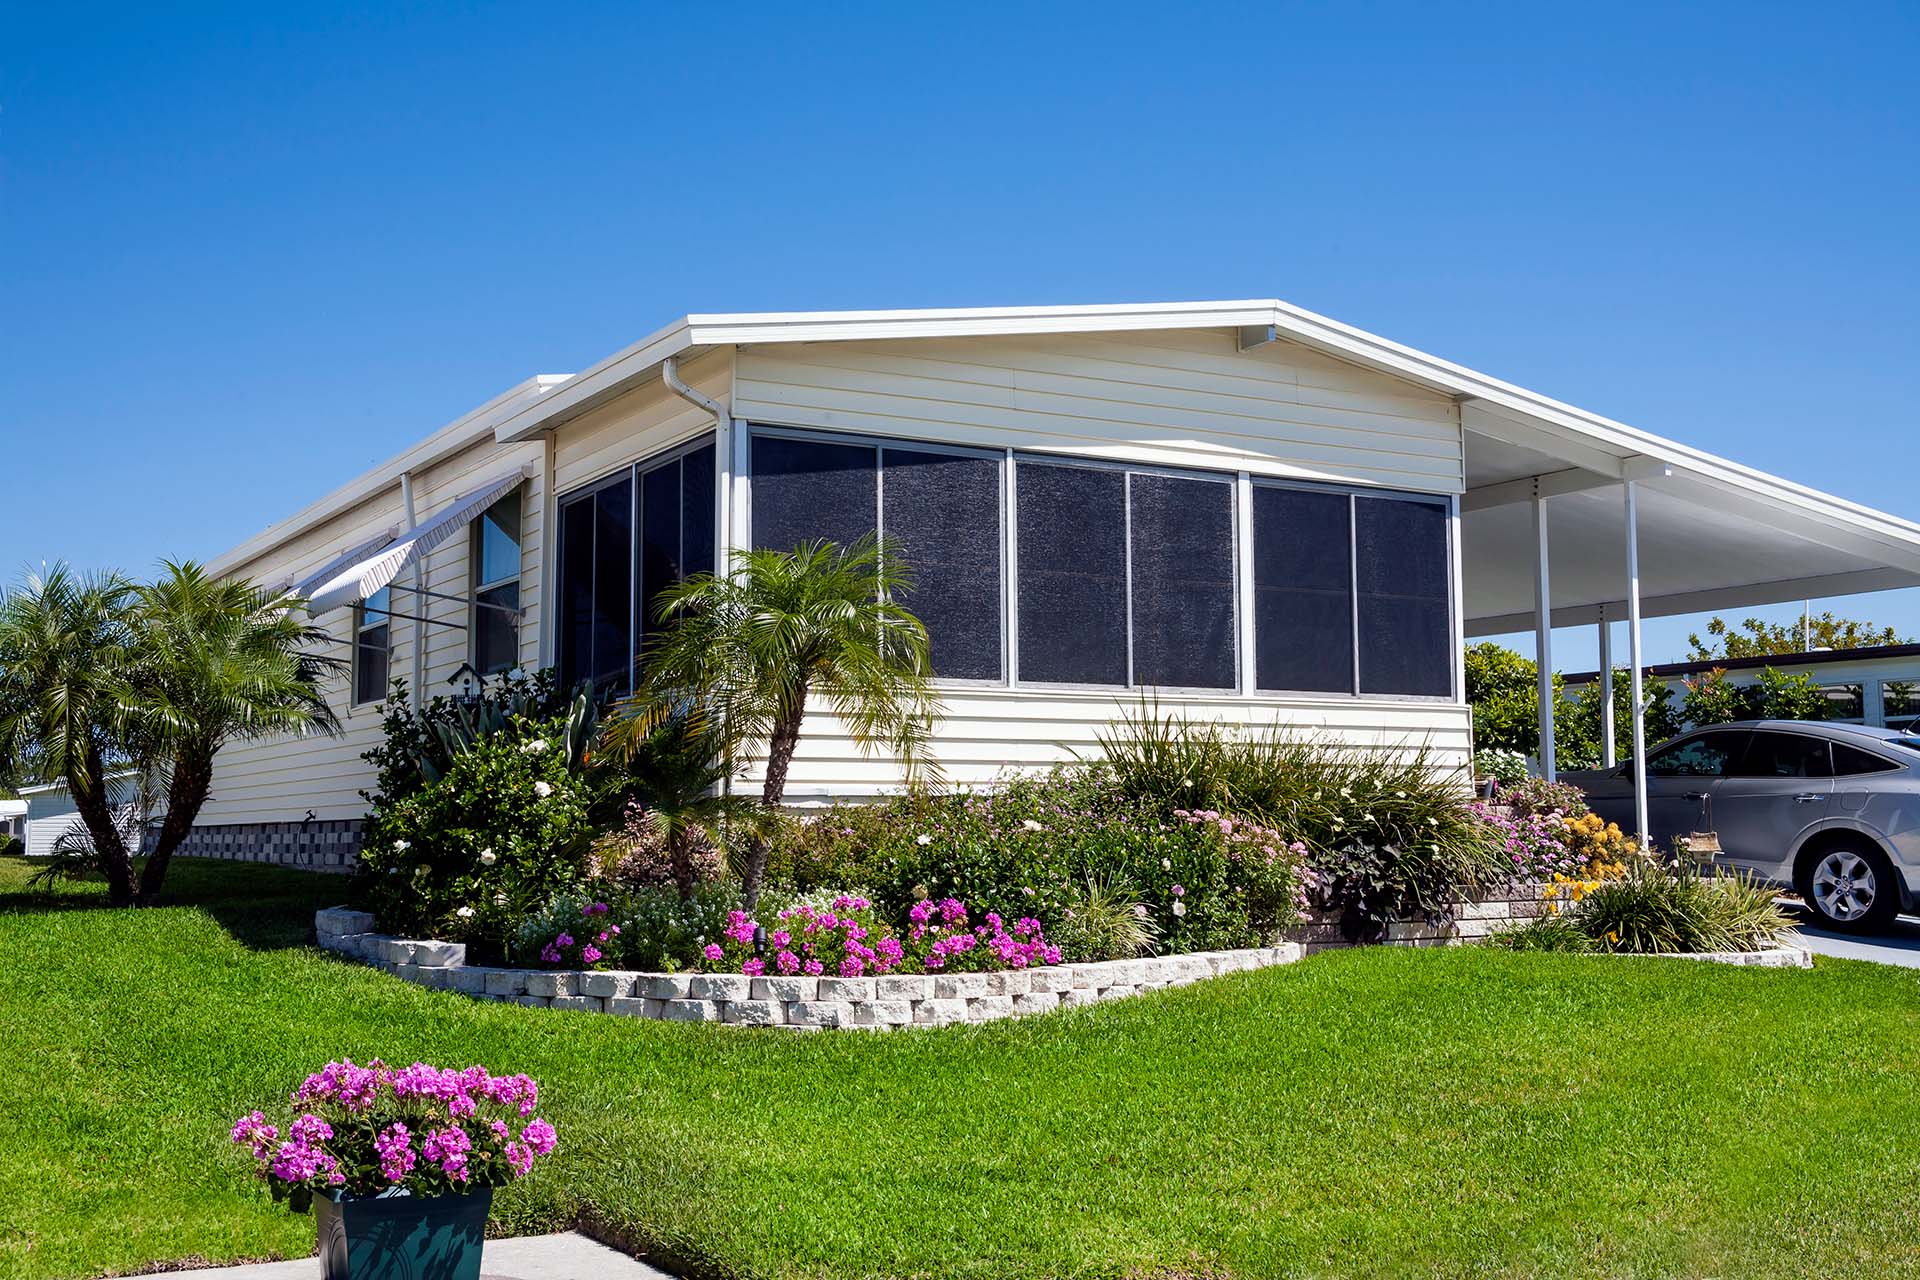 Manufactured Homes Lower the Barrier to Homeownership During Recession